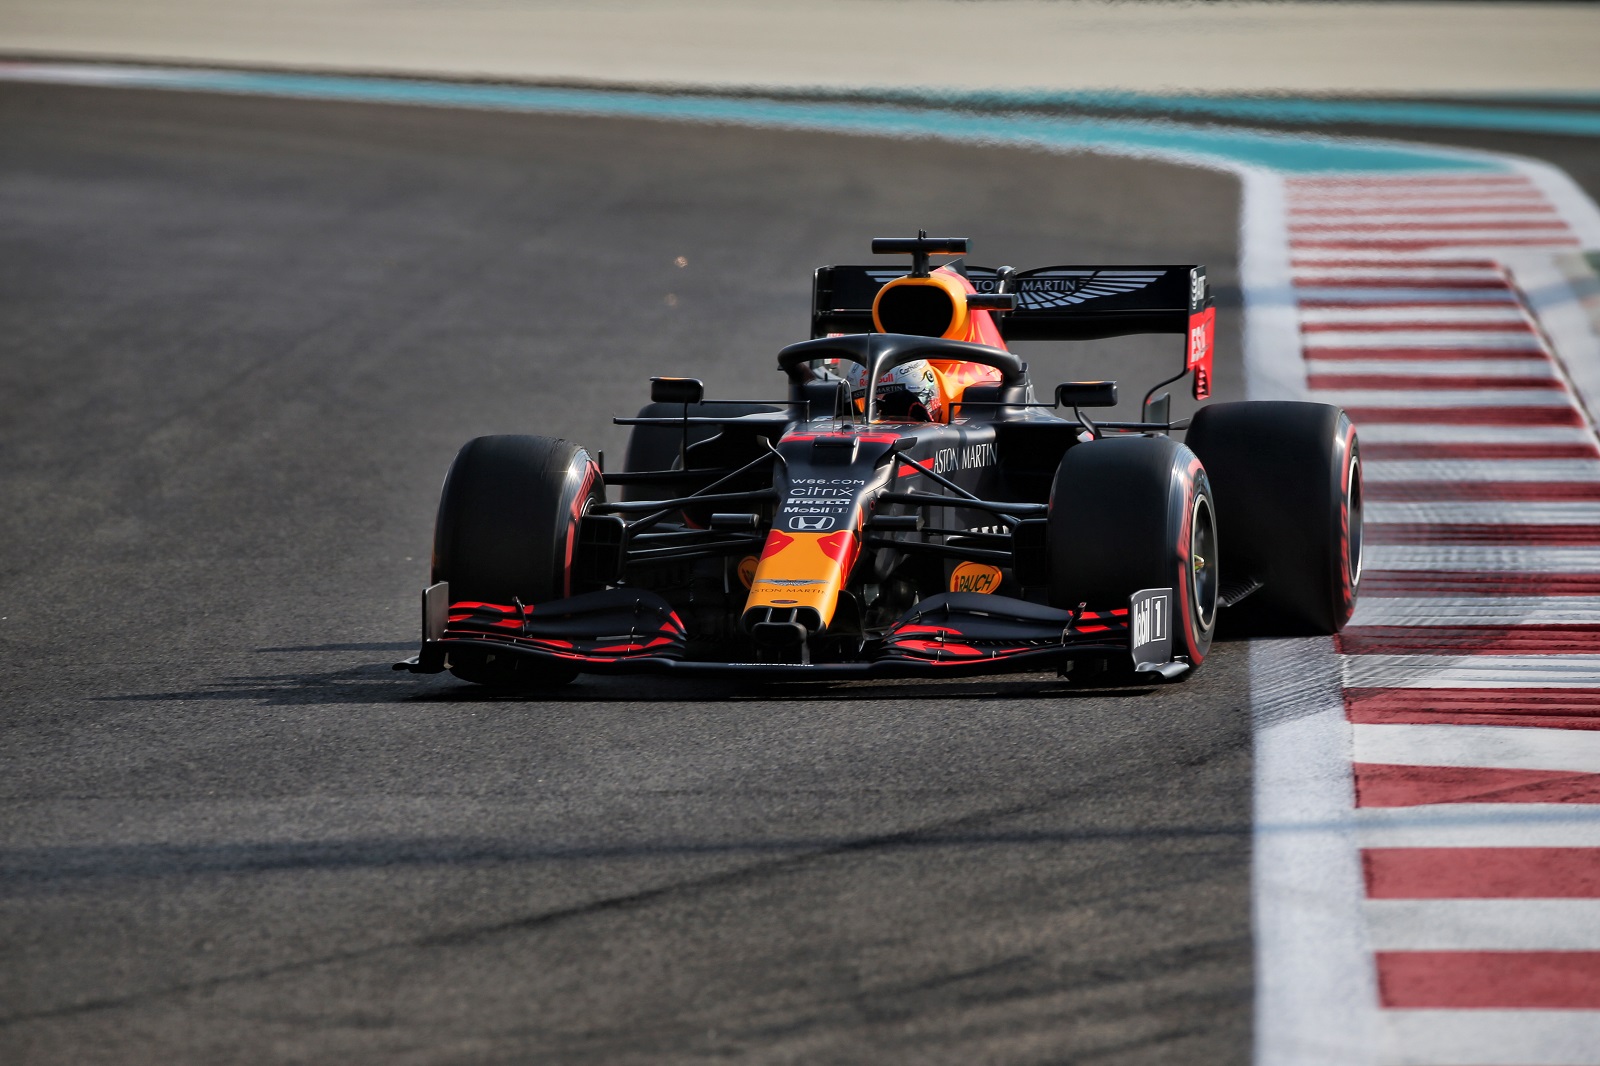 epa08878746 A handout photo made available by the FIA of Dutch driver Max Verstappen of Red Bull Racing in action during the third practice session of the Formula One Grand Prix of Abu Dhabi at Yas Marina Circuit in Abu Dhabi, United Arab Emirates, 12 December 2020. The Formula One Grand Prix of Abu Dhabi will take place on 13 December 2020.  EPA/FIA/F1 HANDOUT  HANDOUT EDITORIAL USE ONLY/NO SALES *** Local Caption *** BAHRAIN, BAHRAIN - NOVEMBER 26: <> during previews ahead of the F1 Grand Prix of Bahrain at Bahrain International Circuit on November 26, 2020 in Bahrain, Bahrain. (Photo by Rudy Carezzevoli/Getty Images)